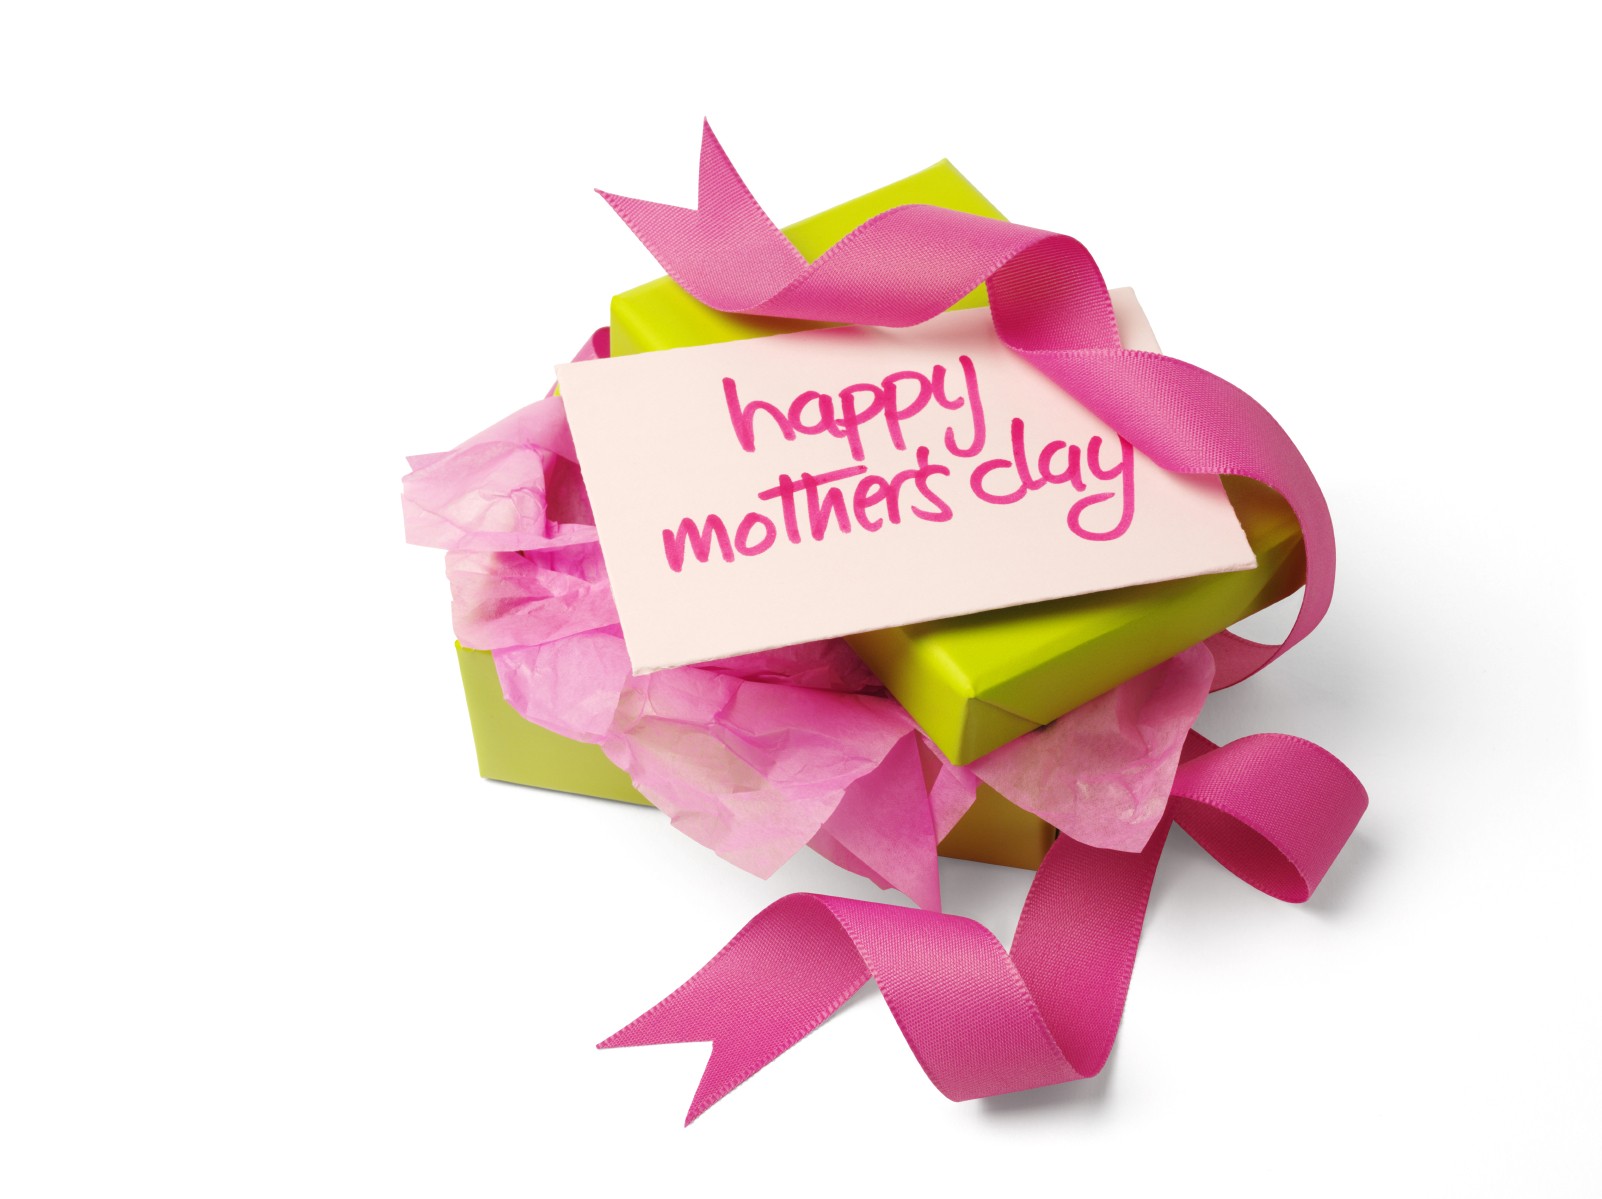 mothers day wishes wallpapers hd download